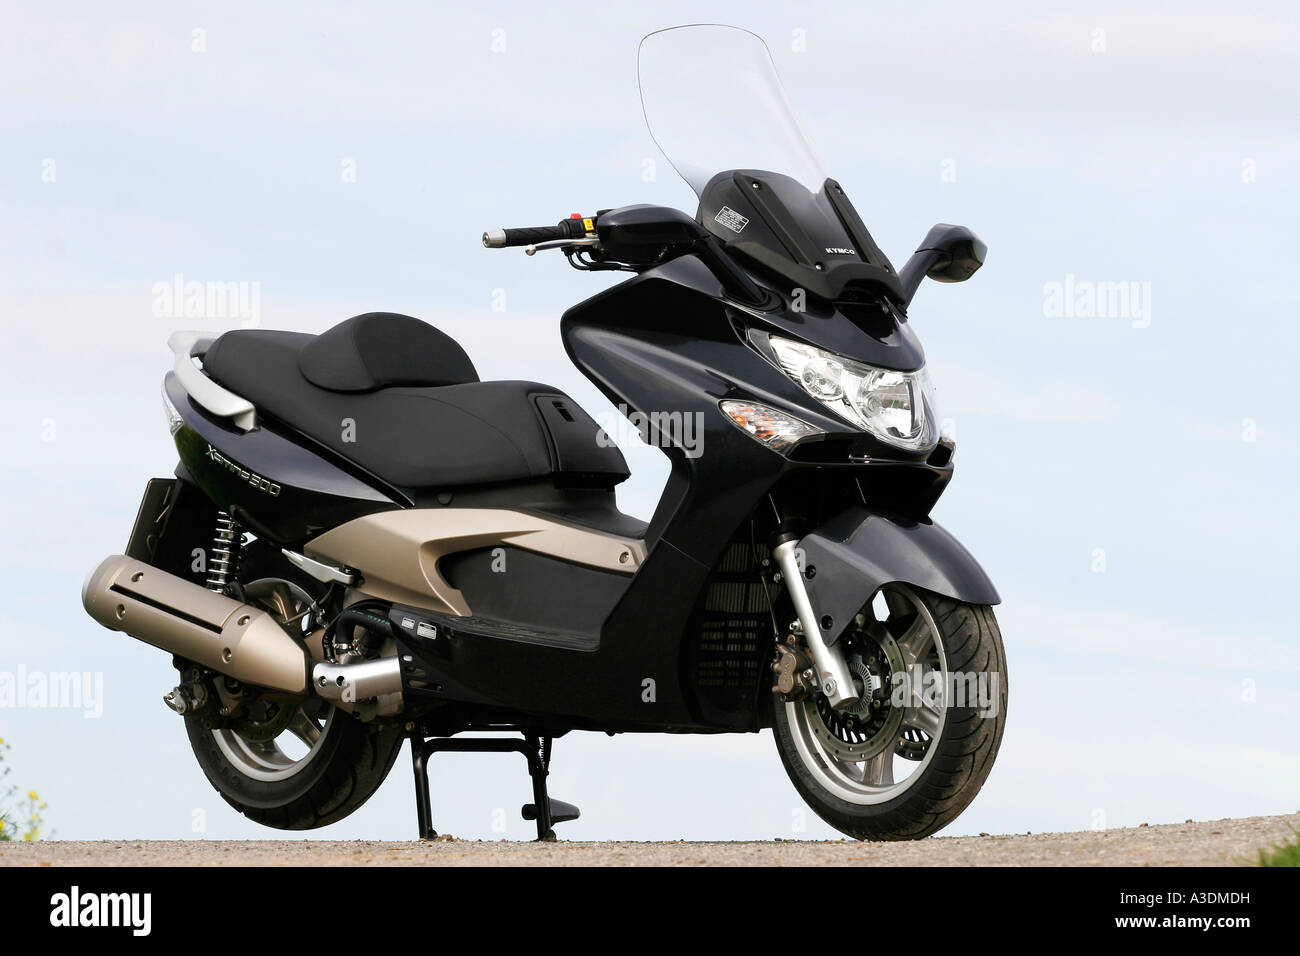 Kymco Xciting 500 scooter Stock Photo - Alamy